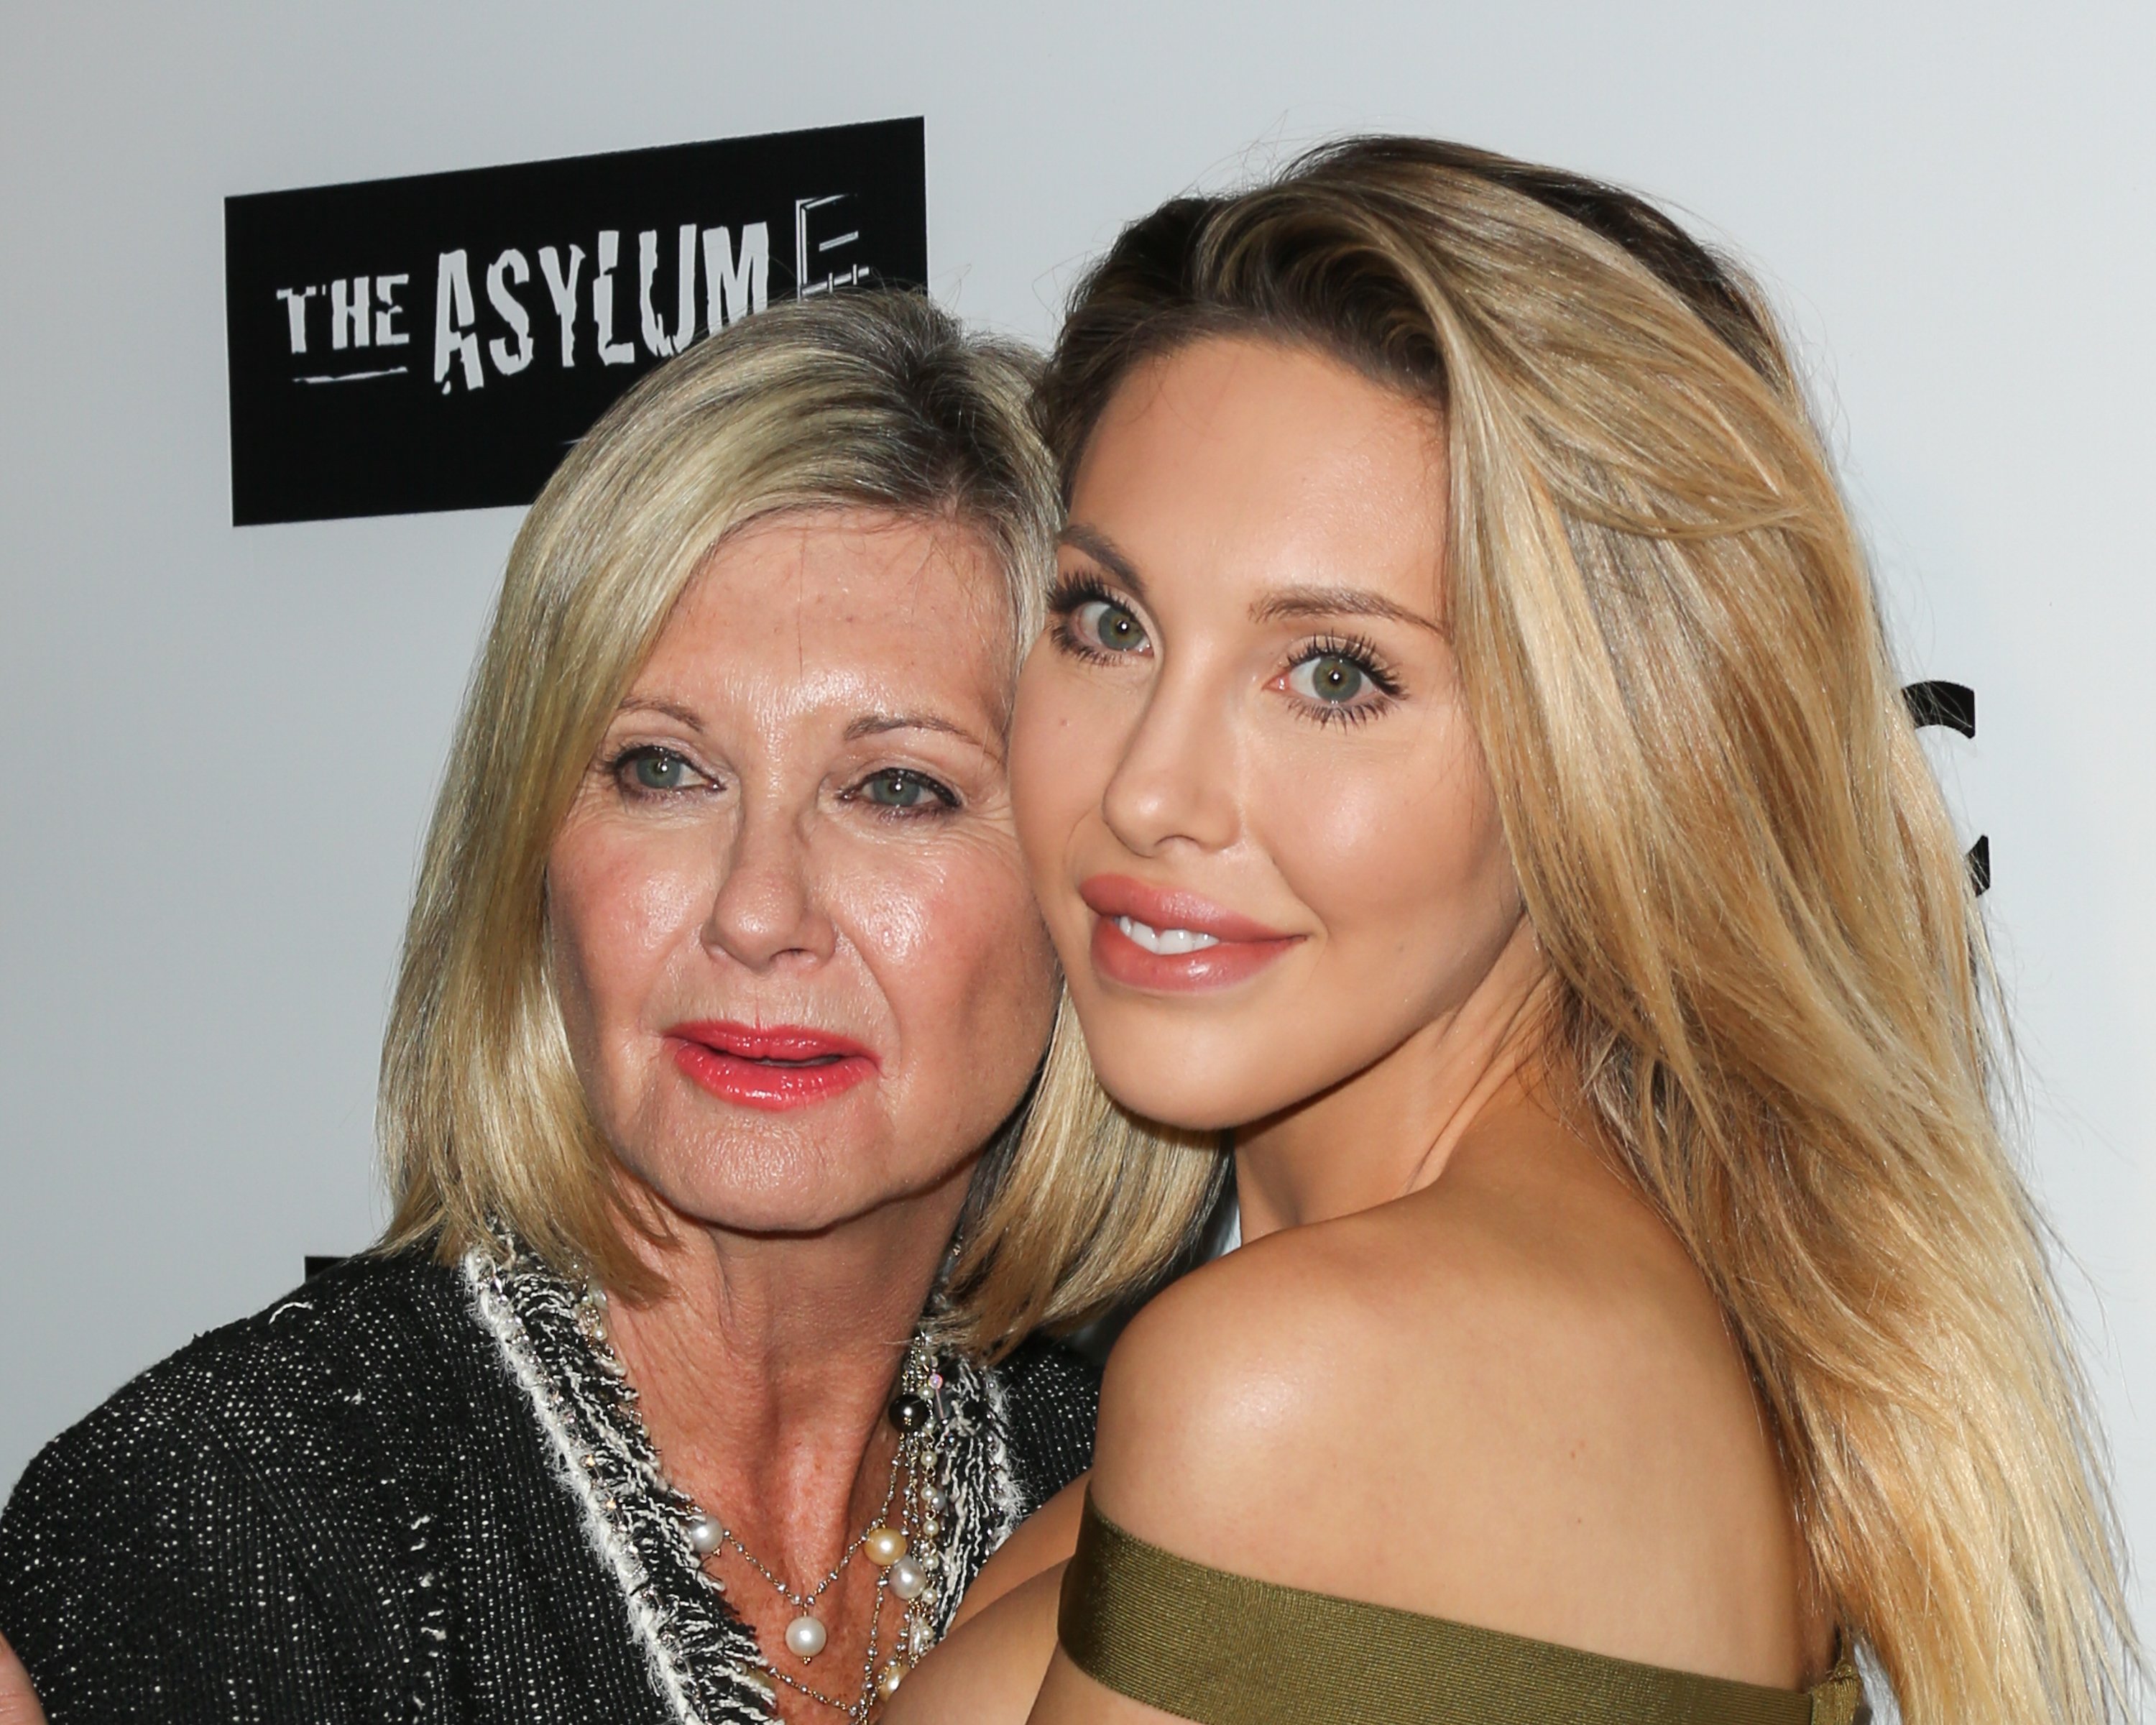 Singers / Actors Olivia Newton-John (L) and Chloe Rose Lattanzi (R) attend the premiere of Syfy's "Dead 7" at Harmony Gold on April 1, 2016 in Los Angeles, California. | Source: Getty Images